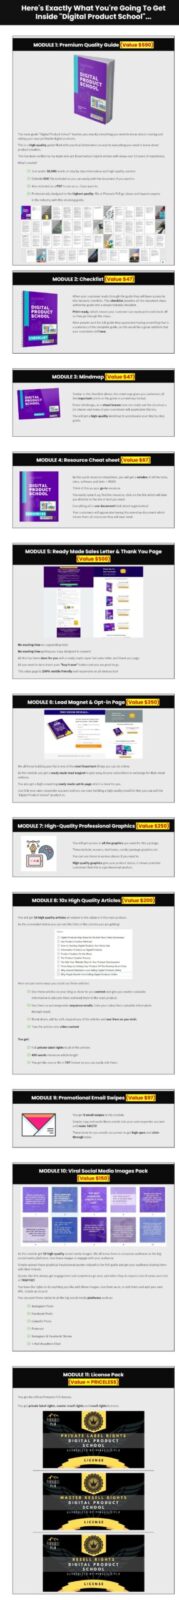 Brand NEW Premium Quality
Done For You PLR Sales Funnel You Can Rebrand
And Sell As Your Own Starting Today!